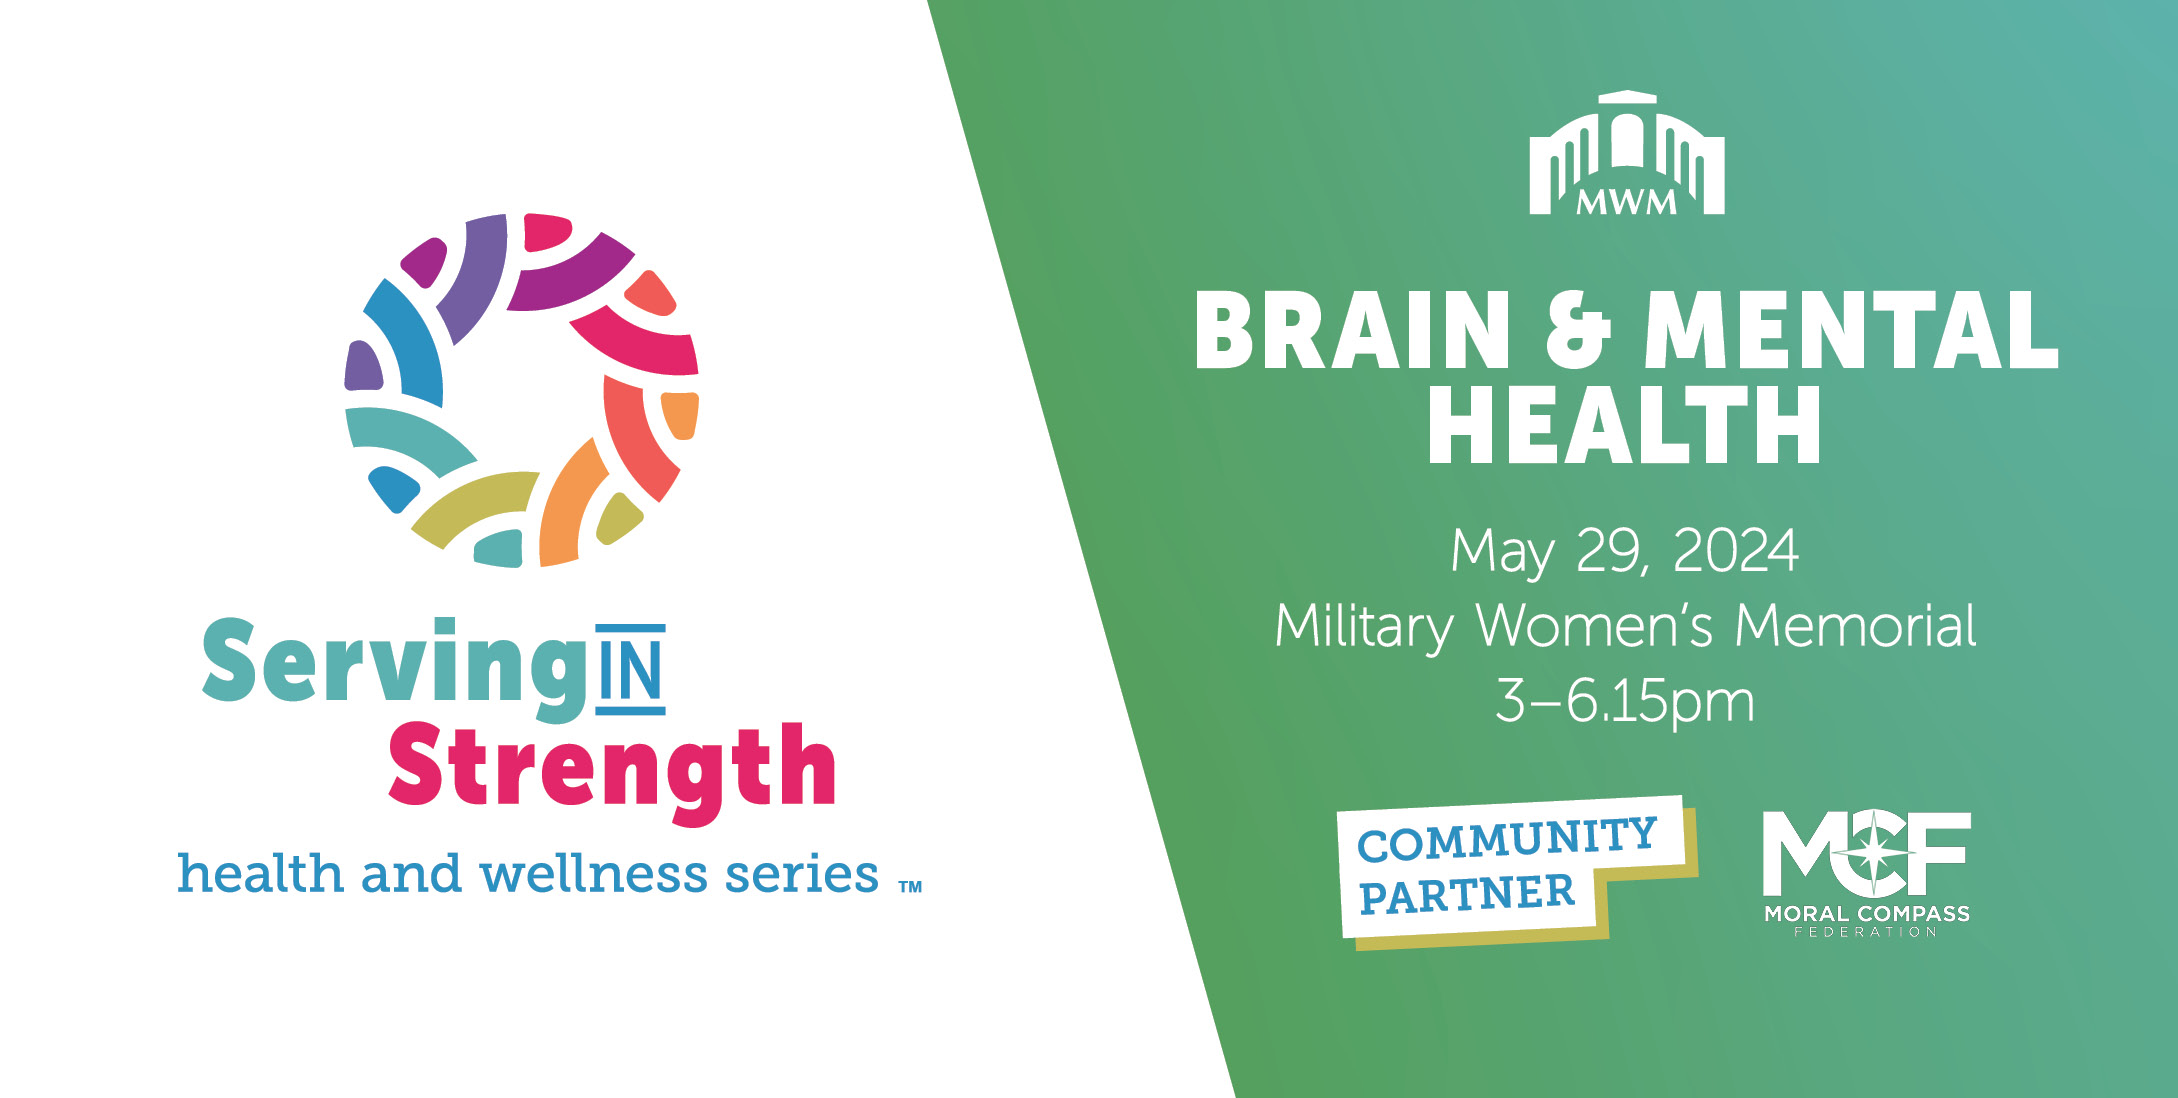 Serving In Strength health and wellness series. Brain and Mental Health May 29, 2024 at the Military Women's Memorial, 3 - 6:15PM.